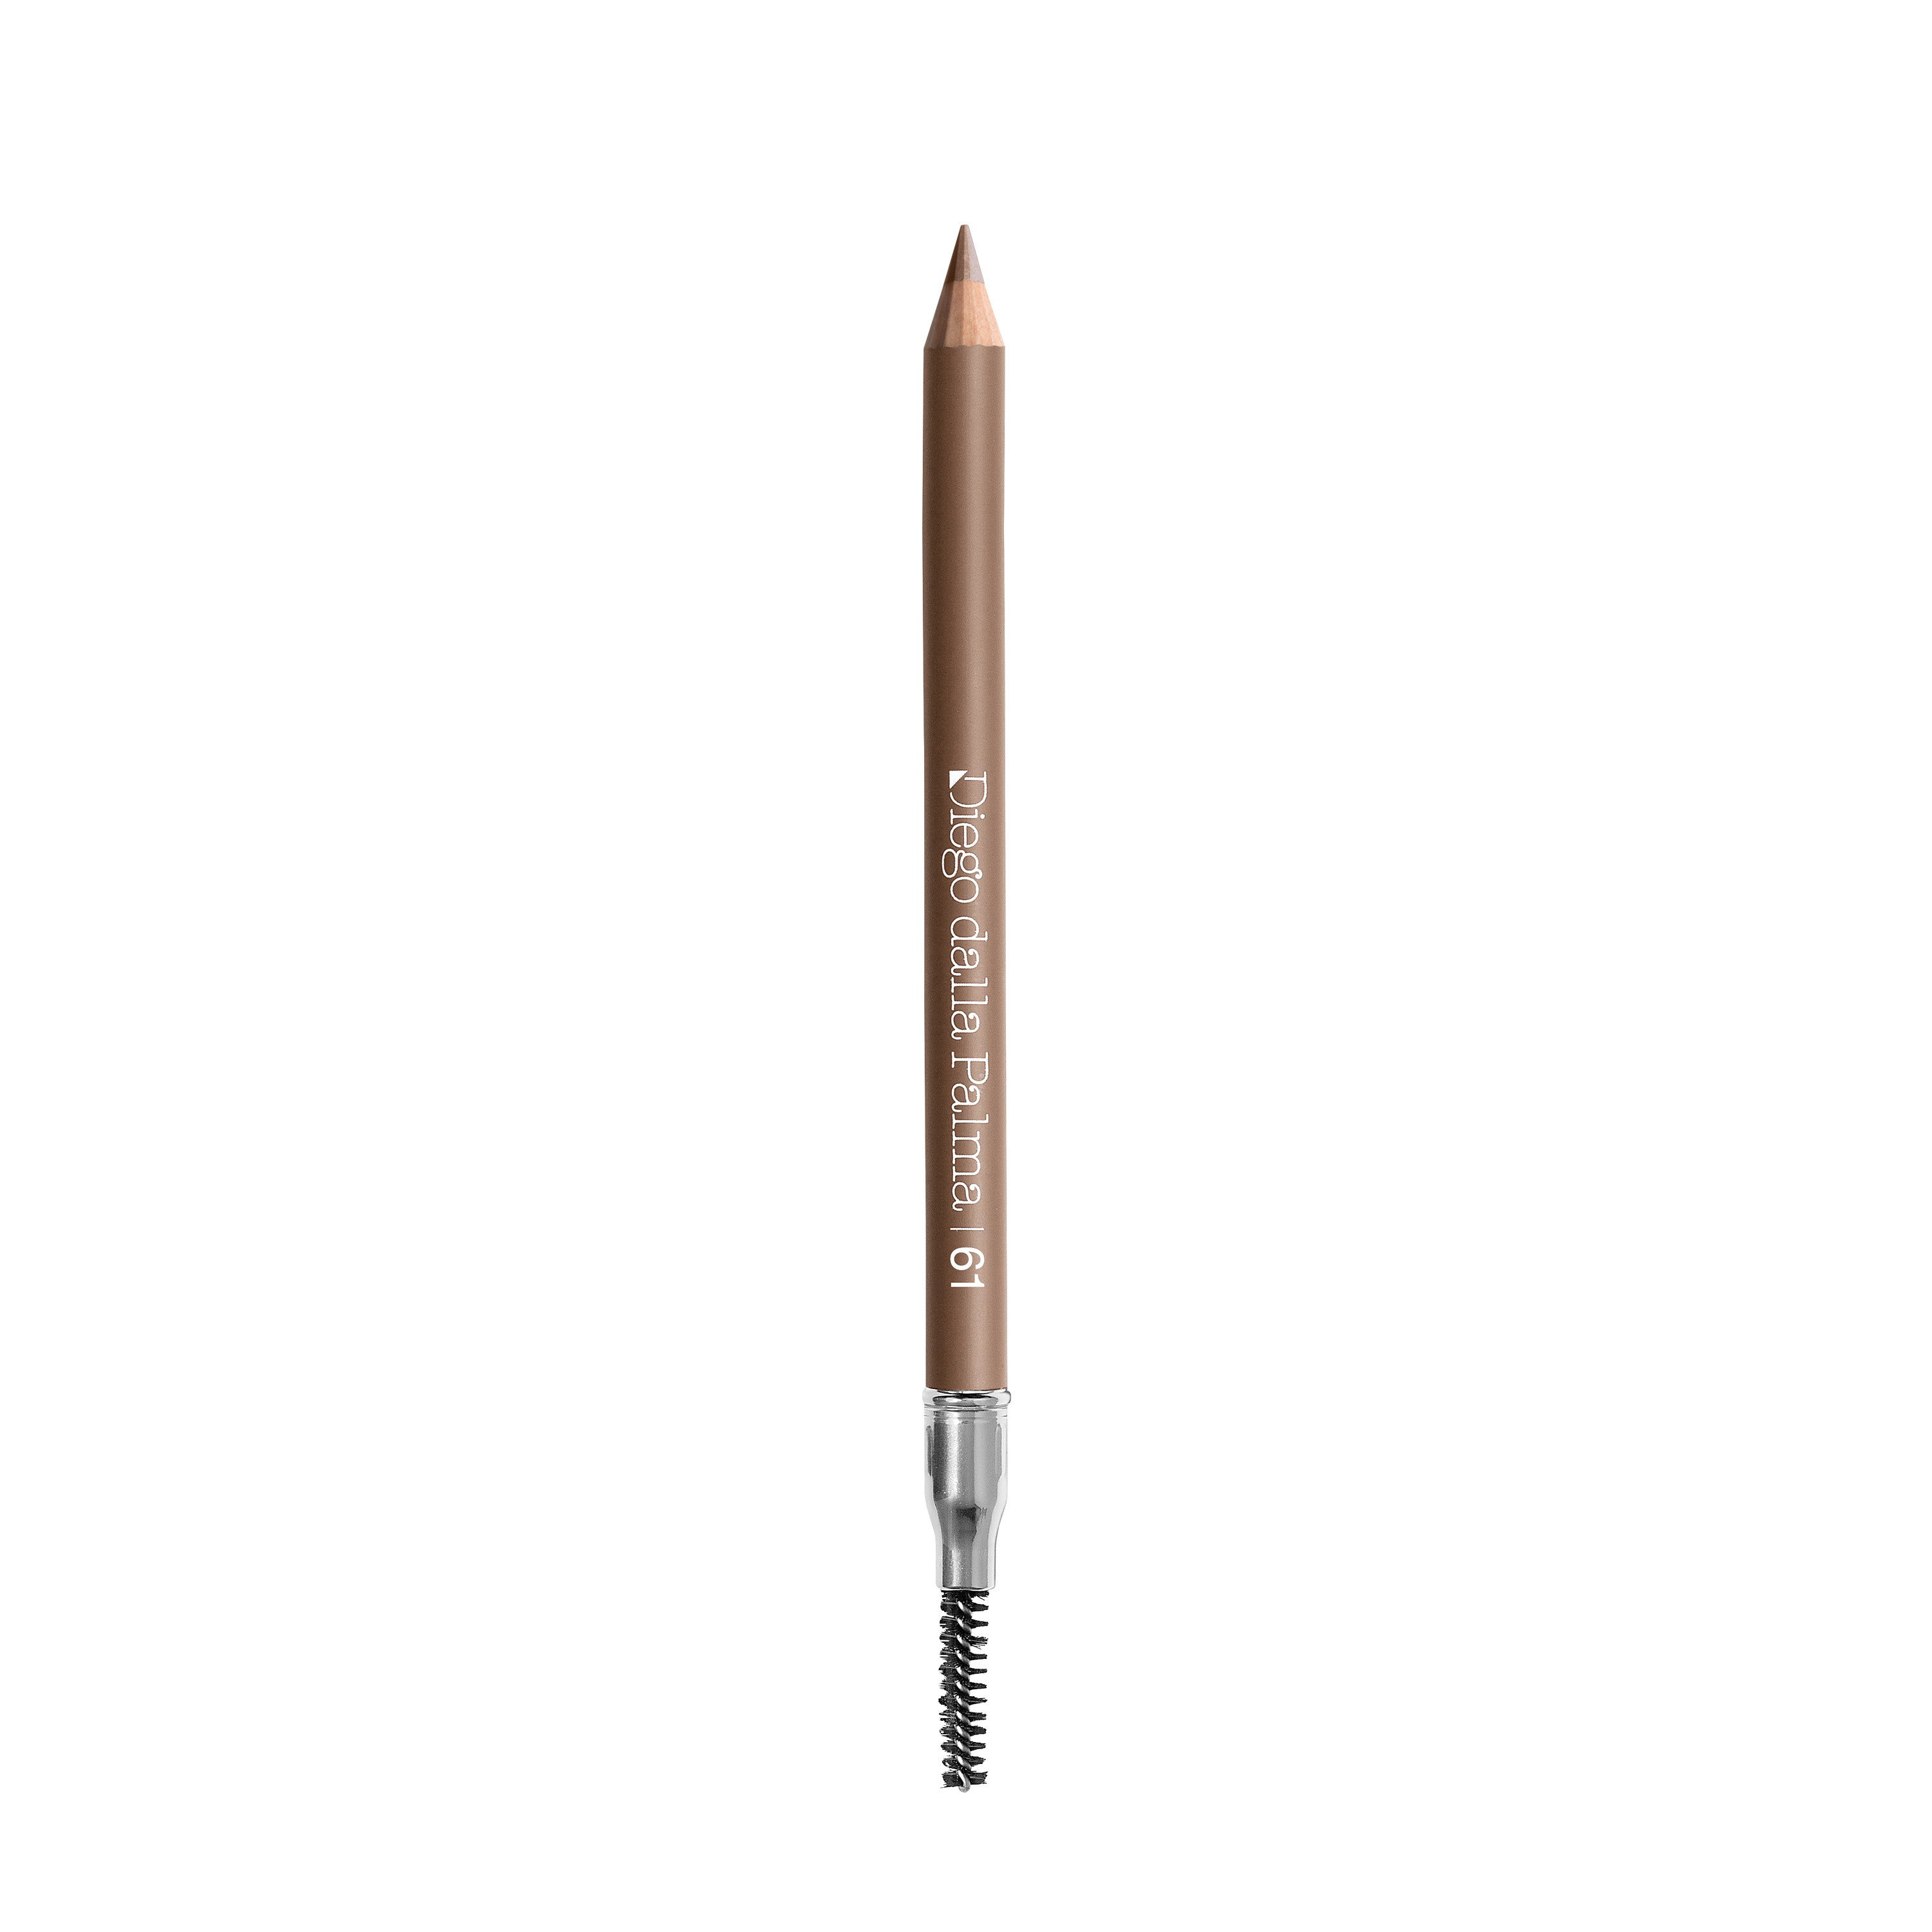 Powder Pencil For Eyebrows - 61 cappuccino, Light Brown, large image number 0